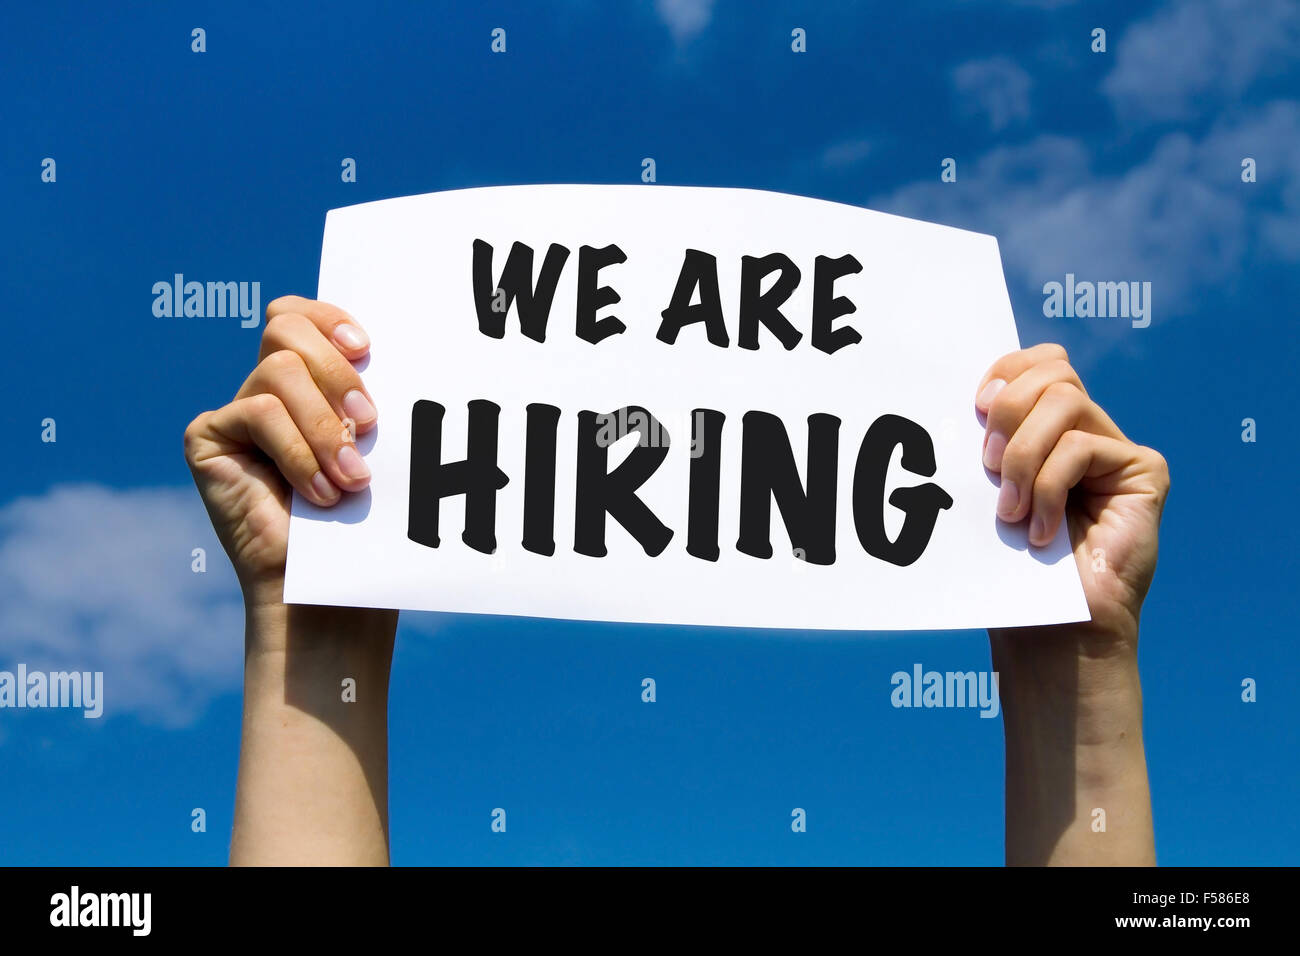 we are hiring - concept Stock Photo